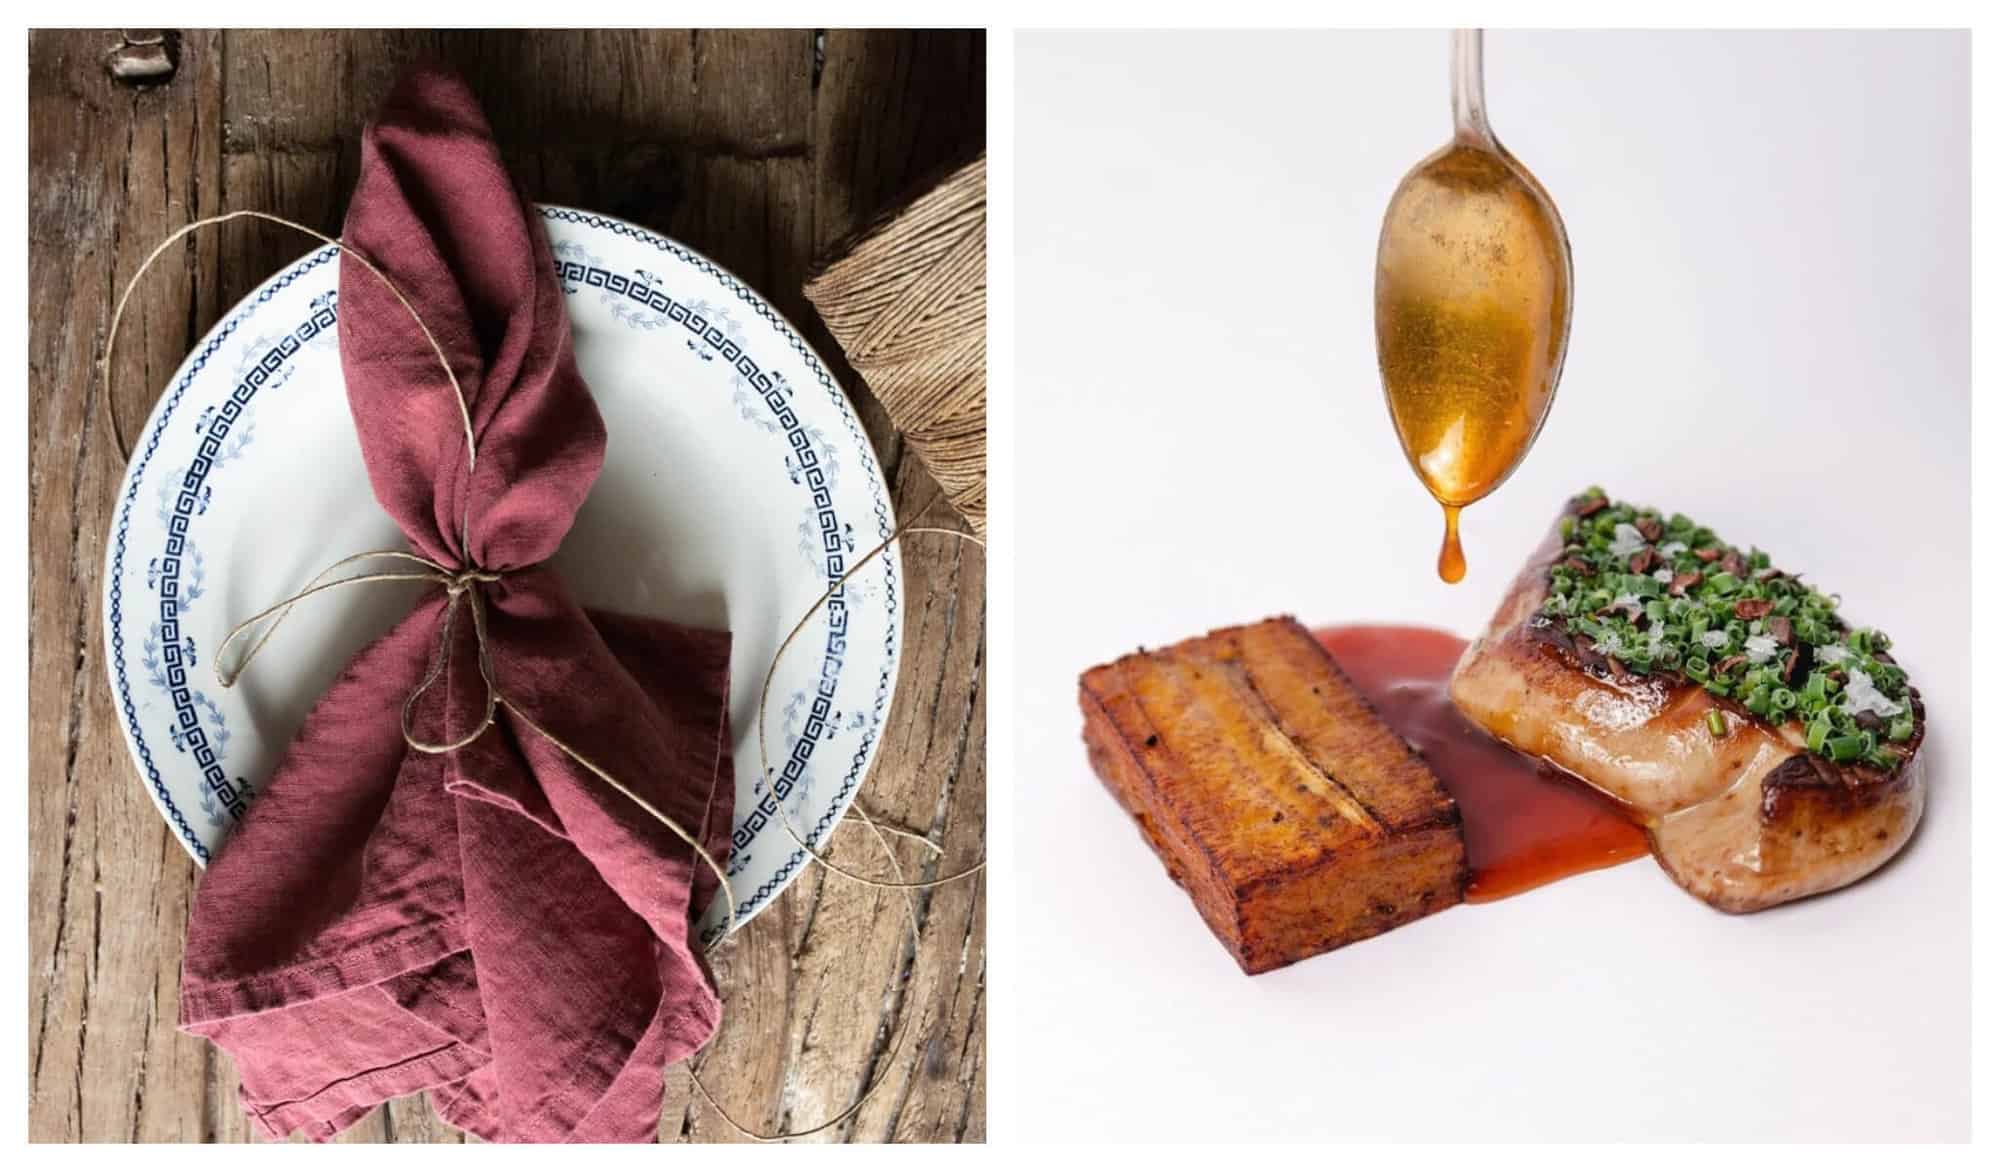 Left: A dark red colored linen napkin lying on a white plate. Right: a plate of foie gras, garnished with herbs and sauce dripping from a spoon.